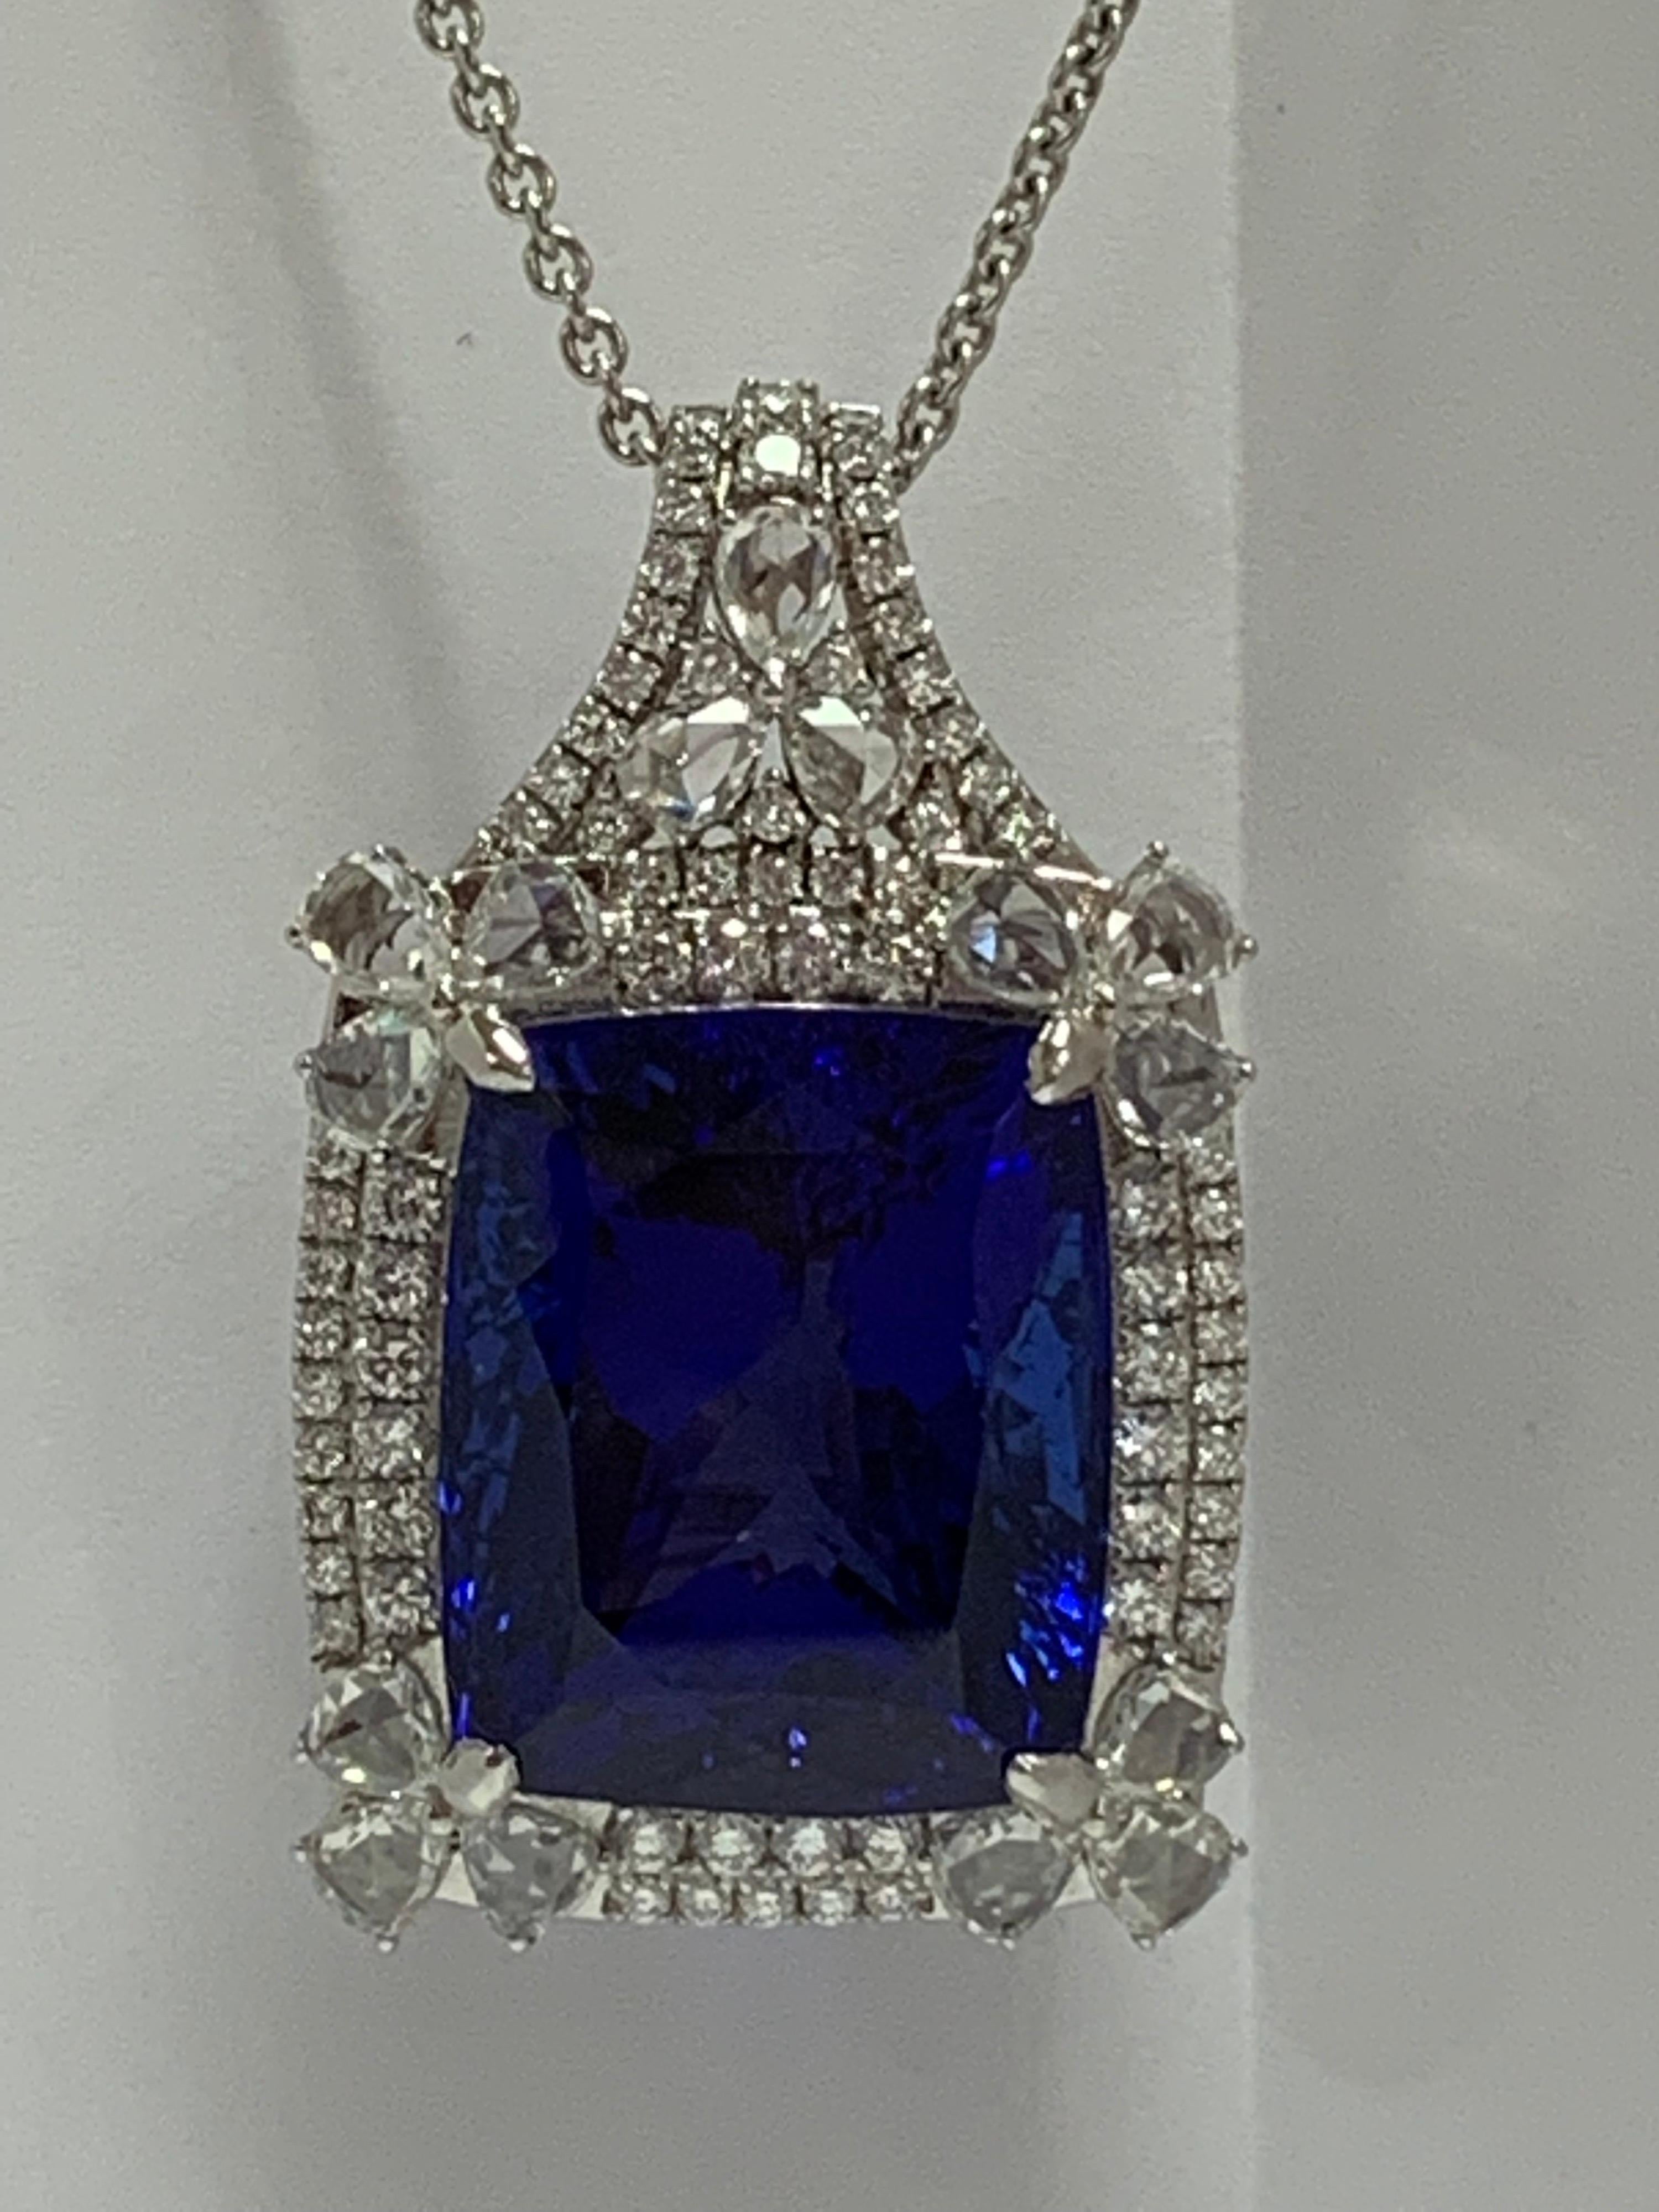 Natural Cushion shape Tanzanite and 2.99 Carat of white Diamonds set in 18 Karat white gold is one of a kind handcrafted pendant. The Pendant include 18 Karat 18 Inches white gold chain .